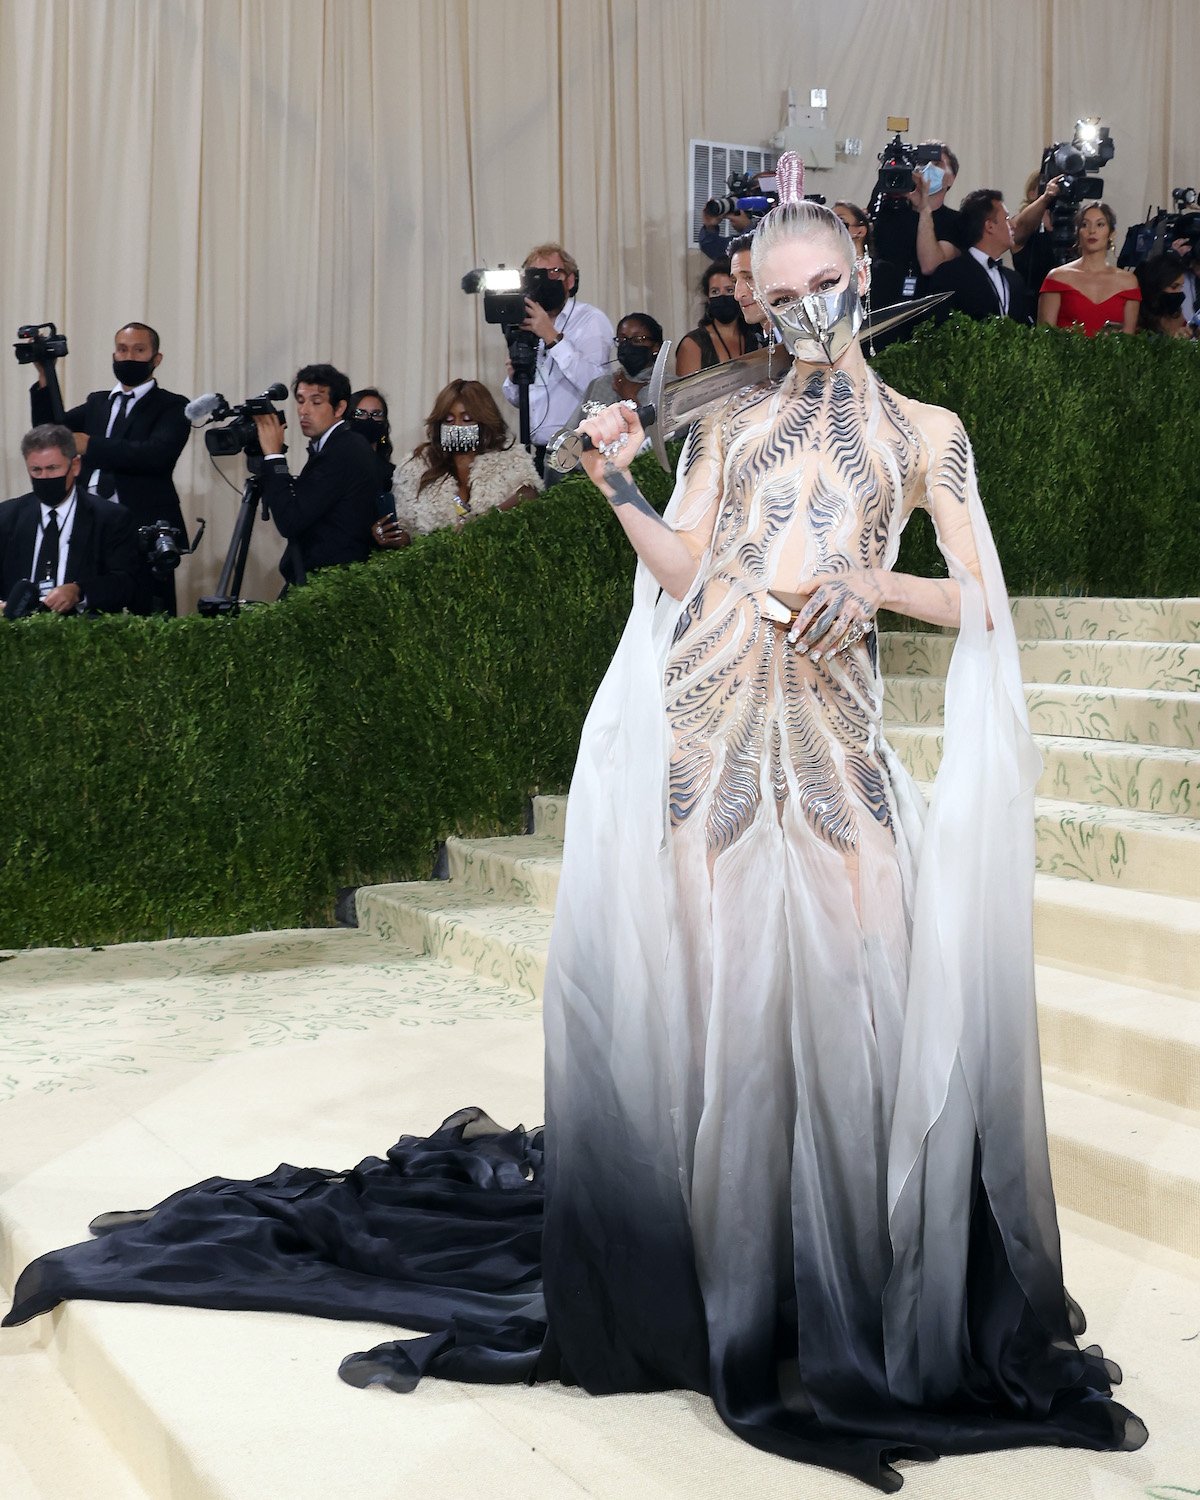 Grimes wears a white to black ombre gown with metallic accents at the 2021 Met Gala. She is holding a sword and a book as part of her look.